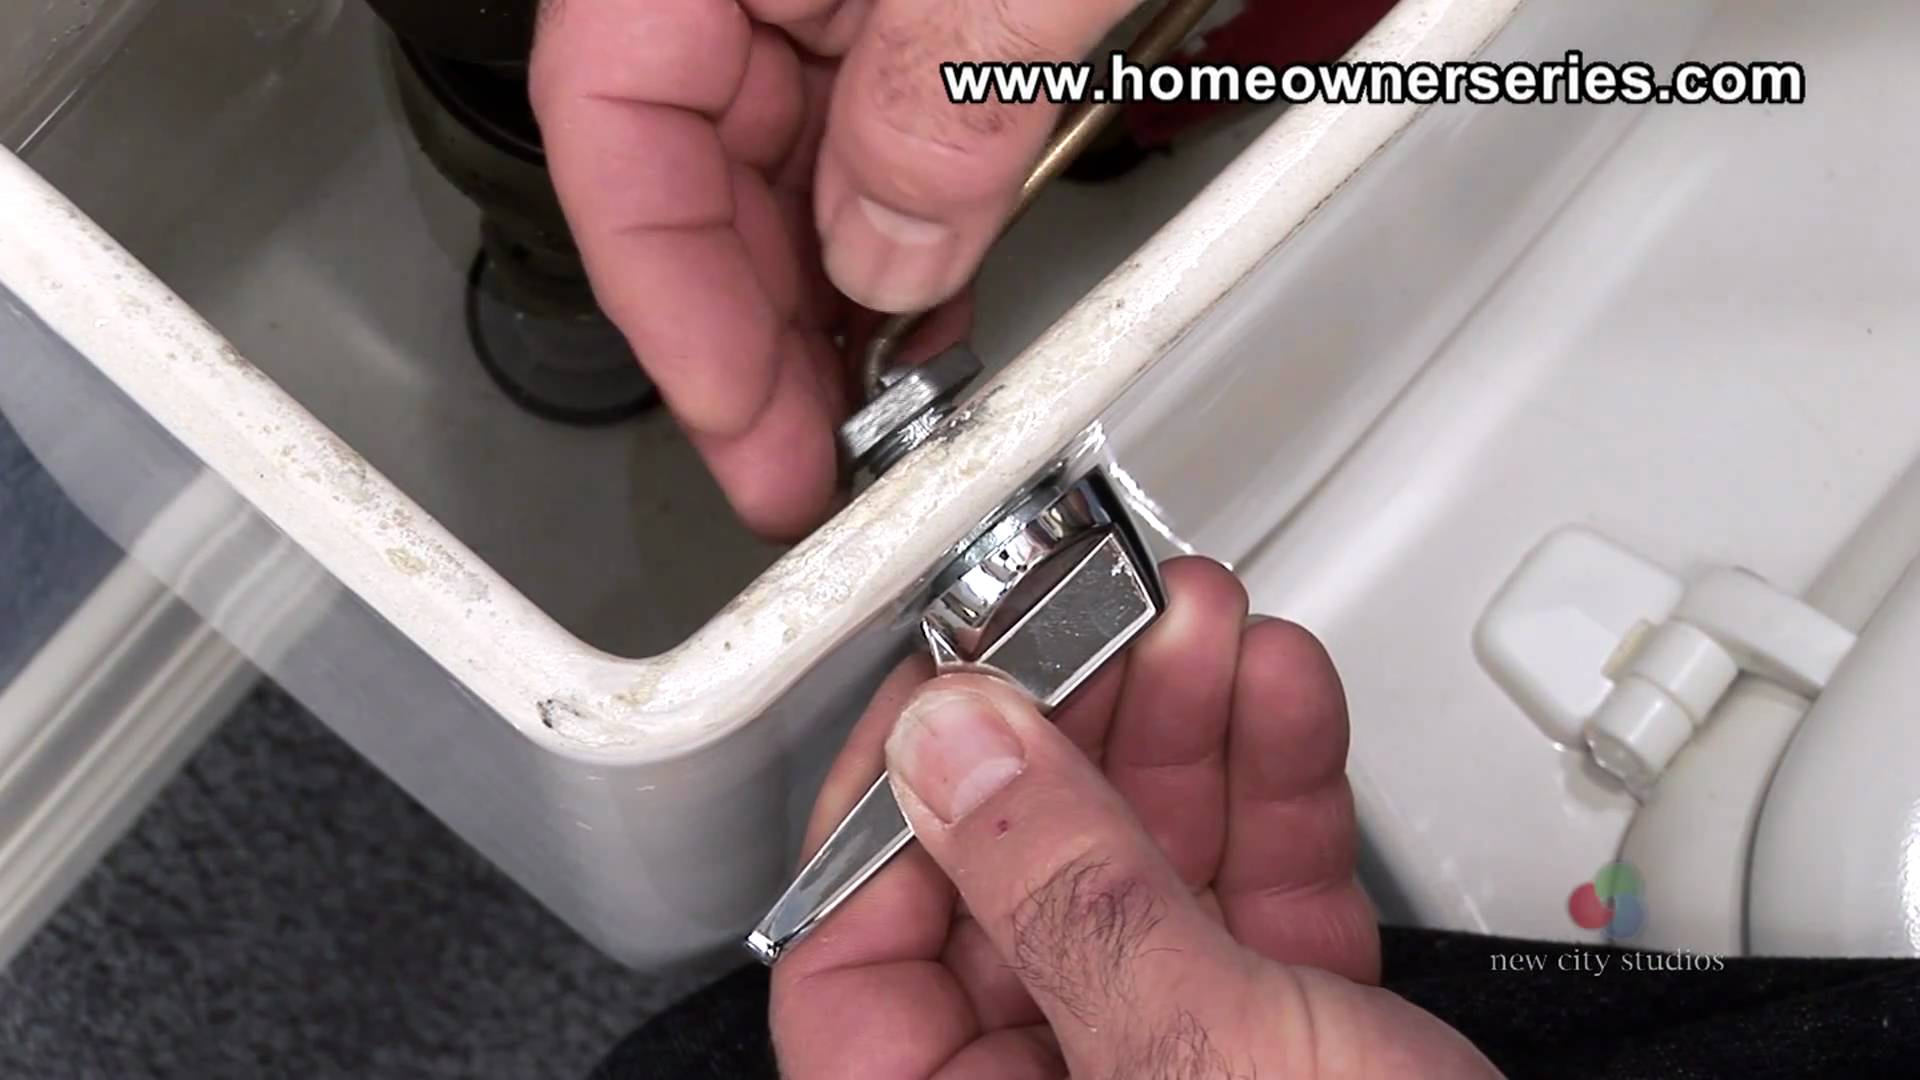 How to Fix a Toilet - Toilet Handle Replacement - YouTube